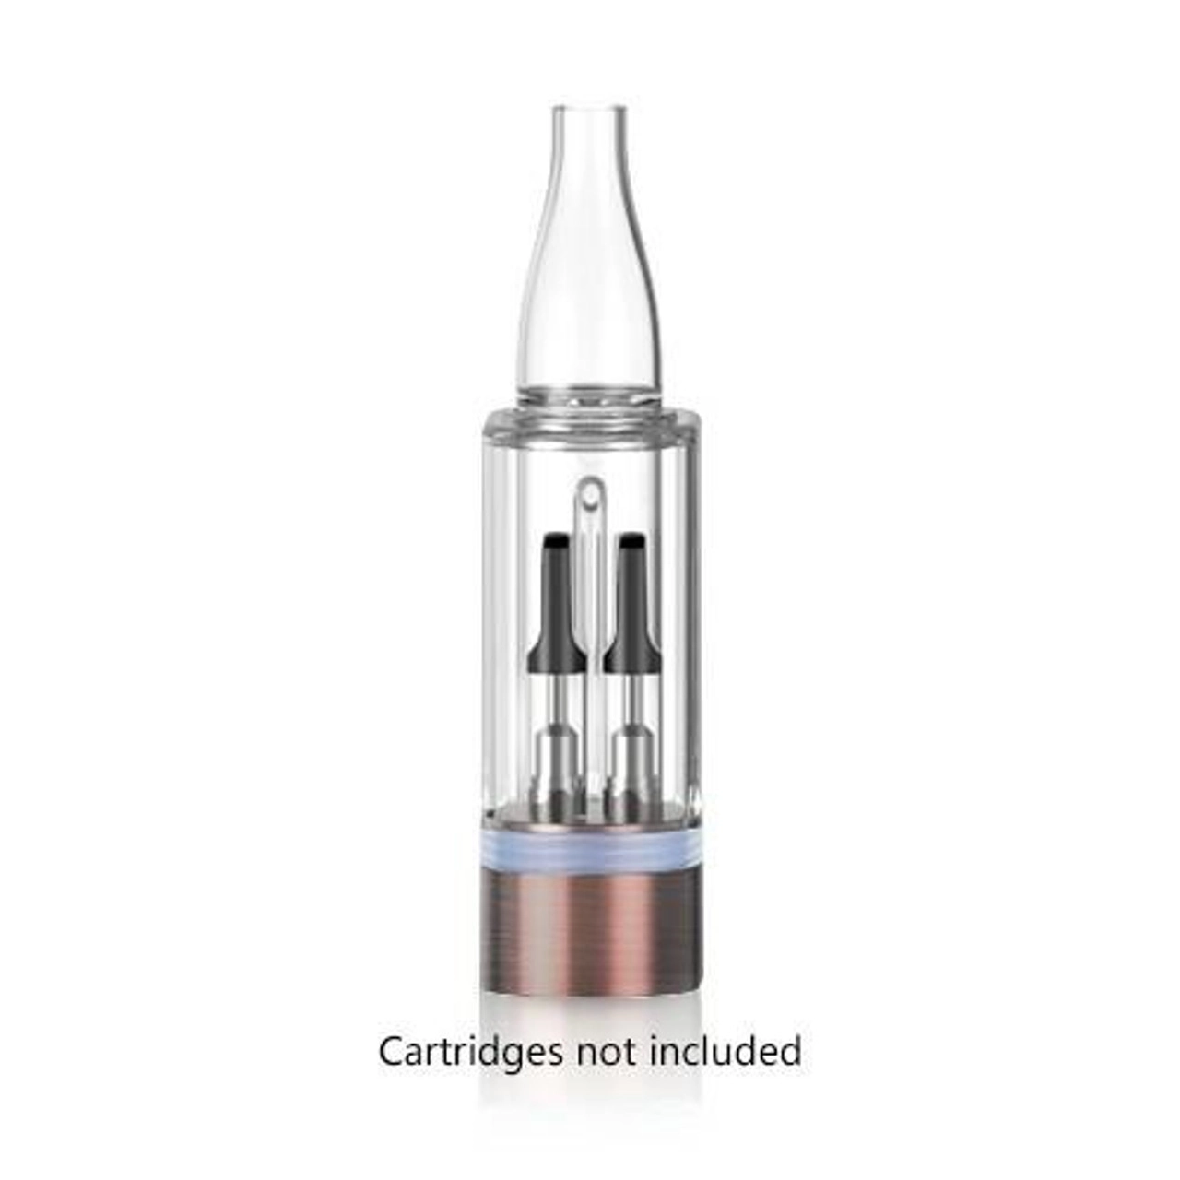 Ccell PS1 2x510 Battery and Glass Bubbler